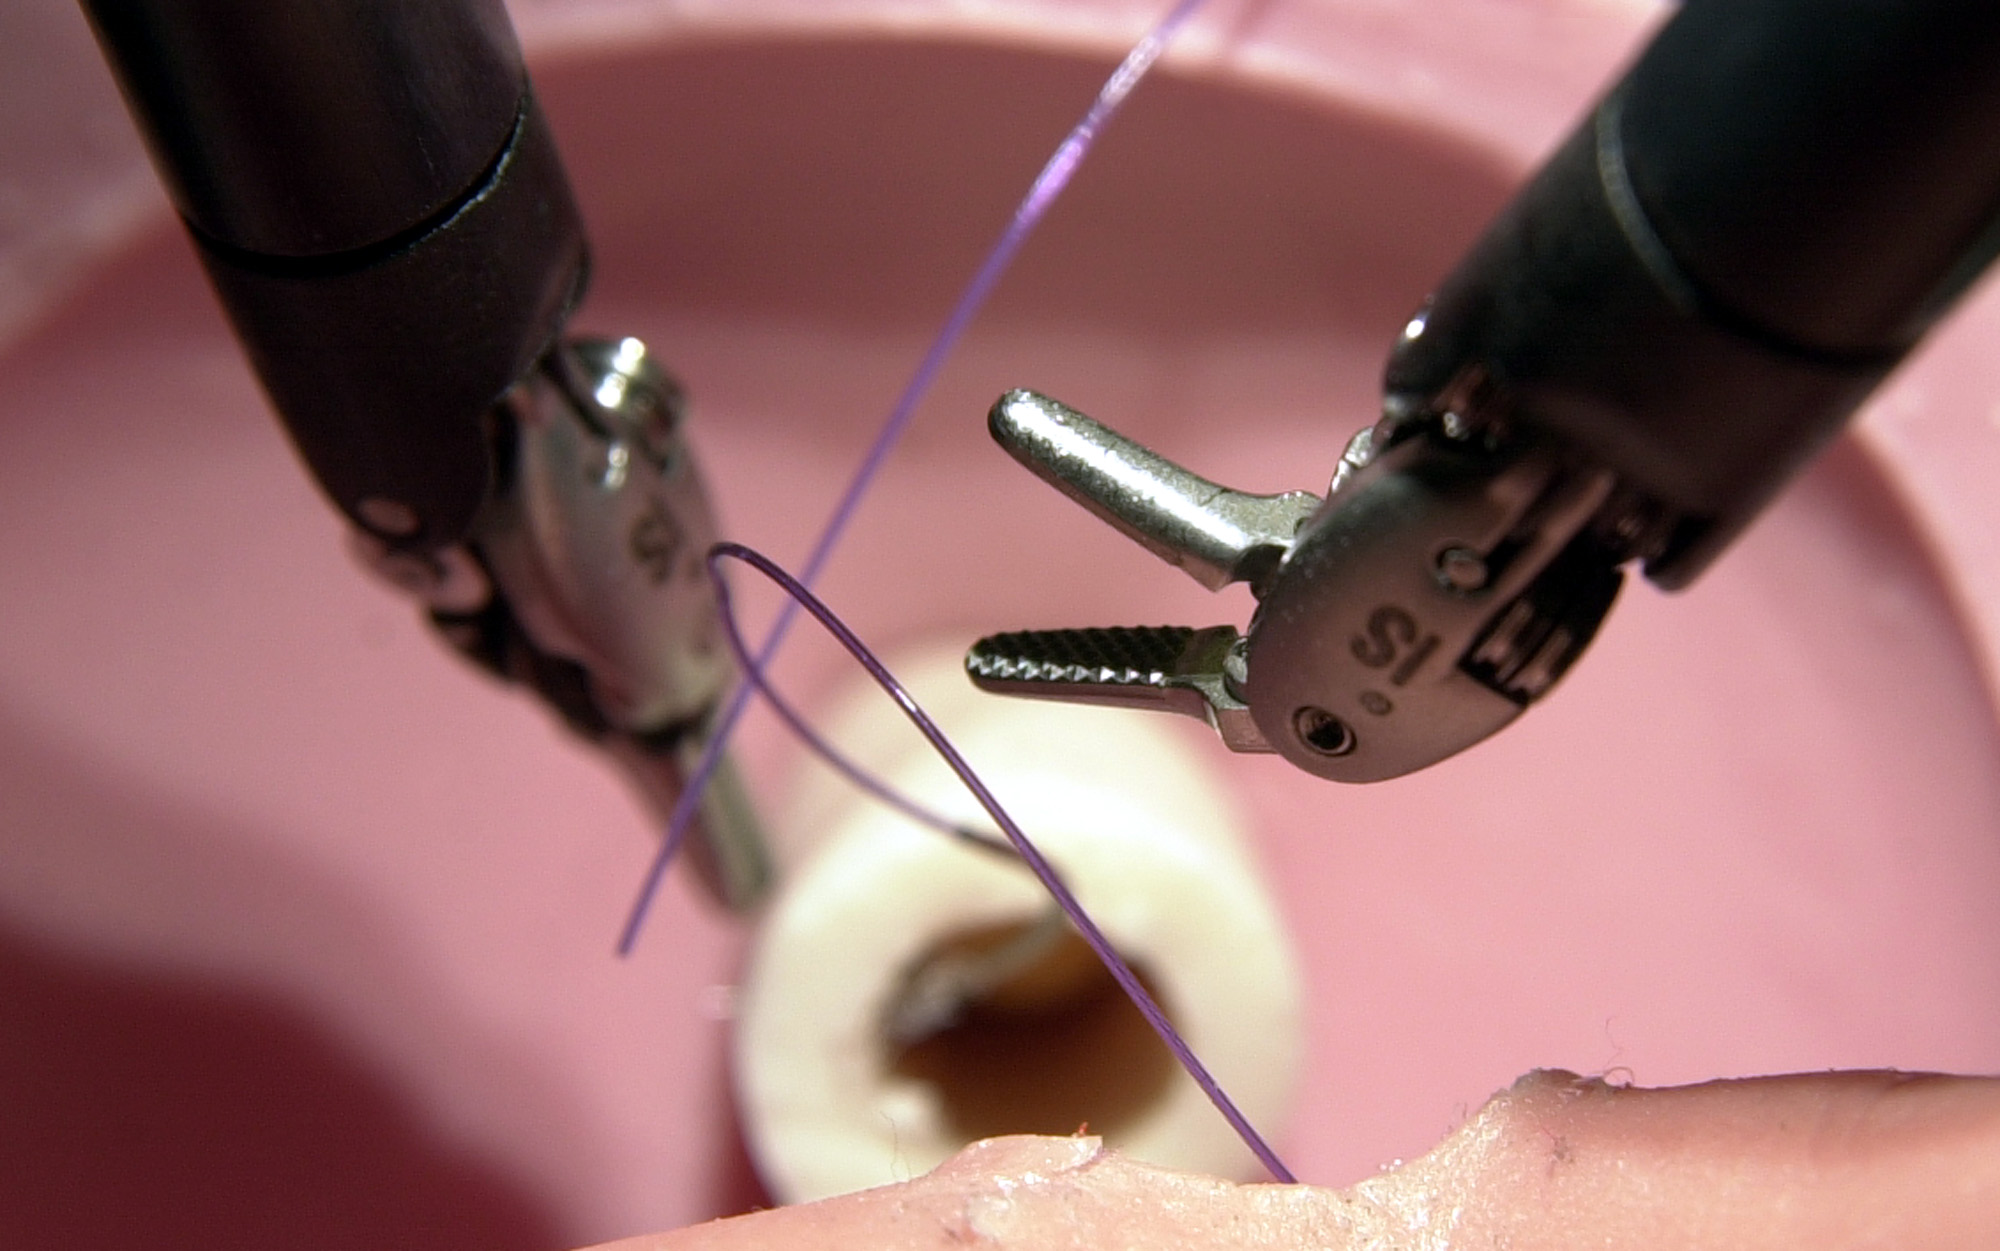 The tiny hands of a surgical robot are used for precision stitching during a demonstration at Maine Medical Center in Portland, Maine.